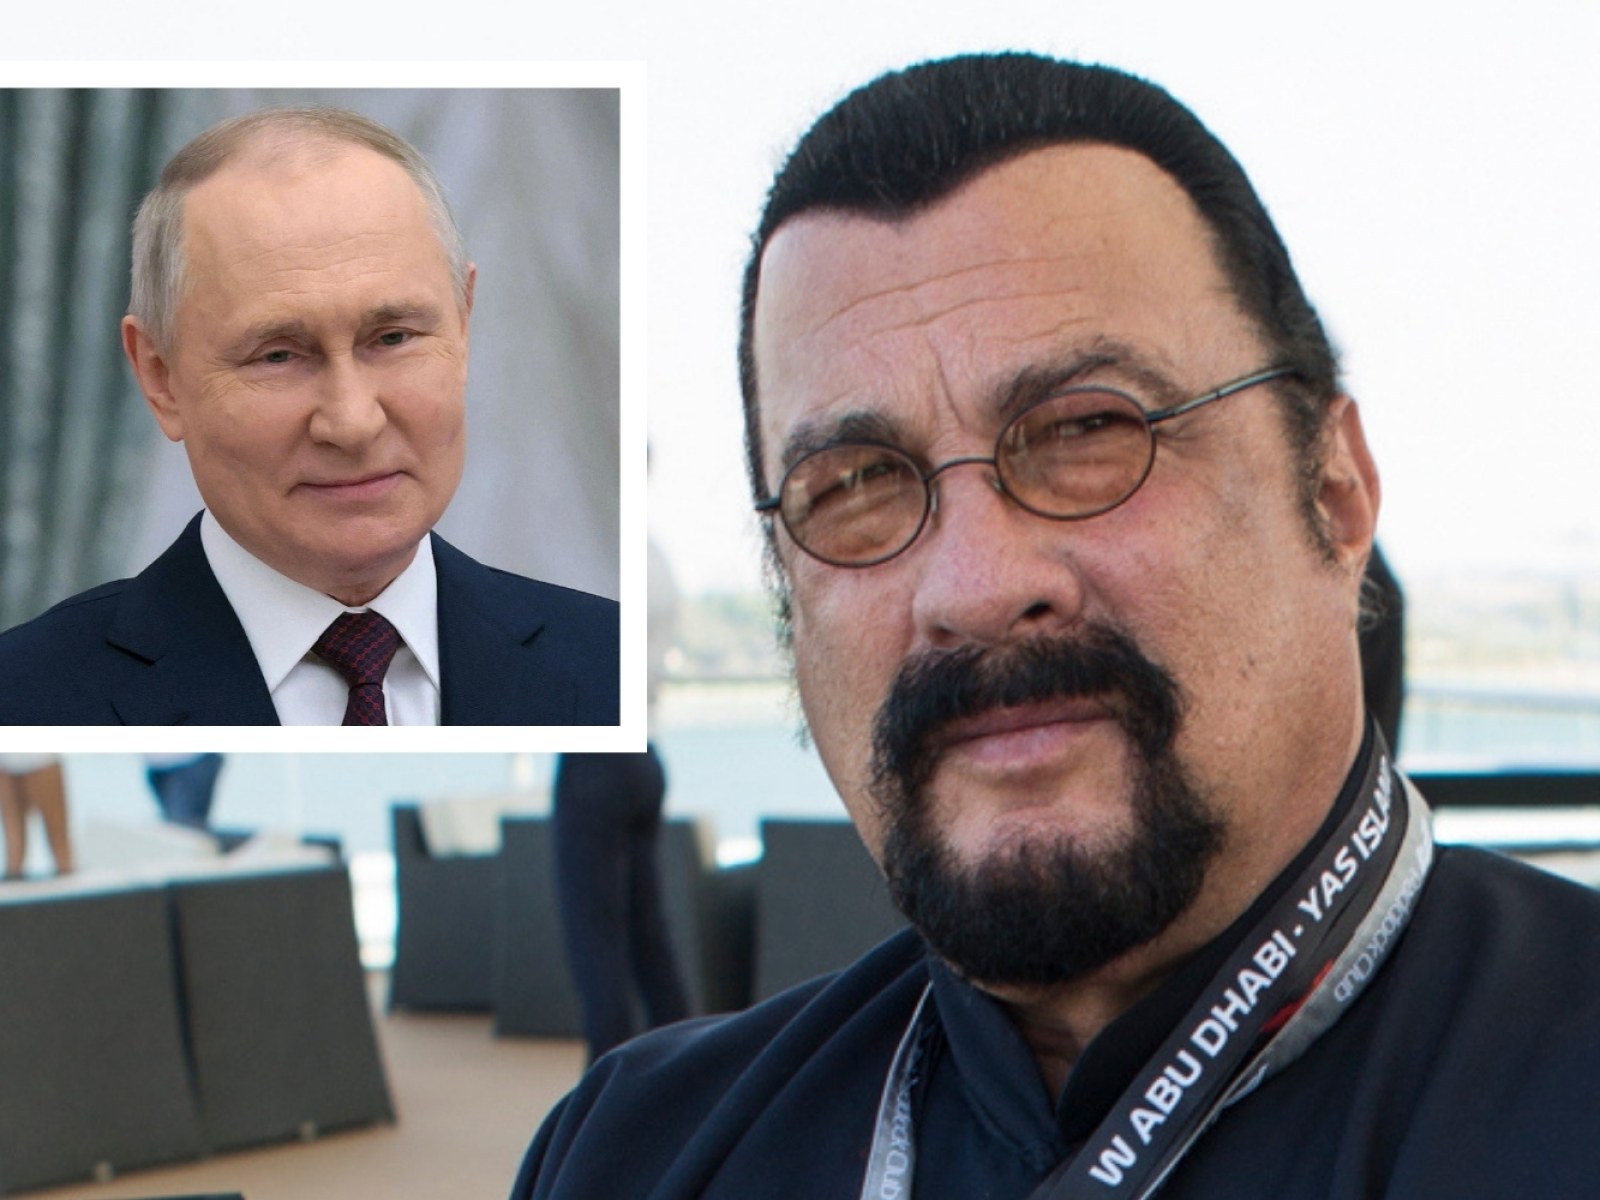 Steven Seagal Says He's '1 Million Percent Russian' After Award From Putin